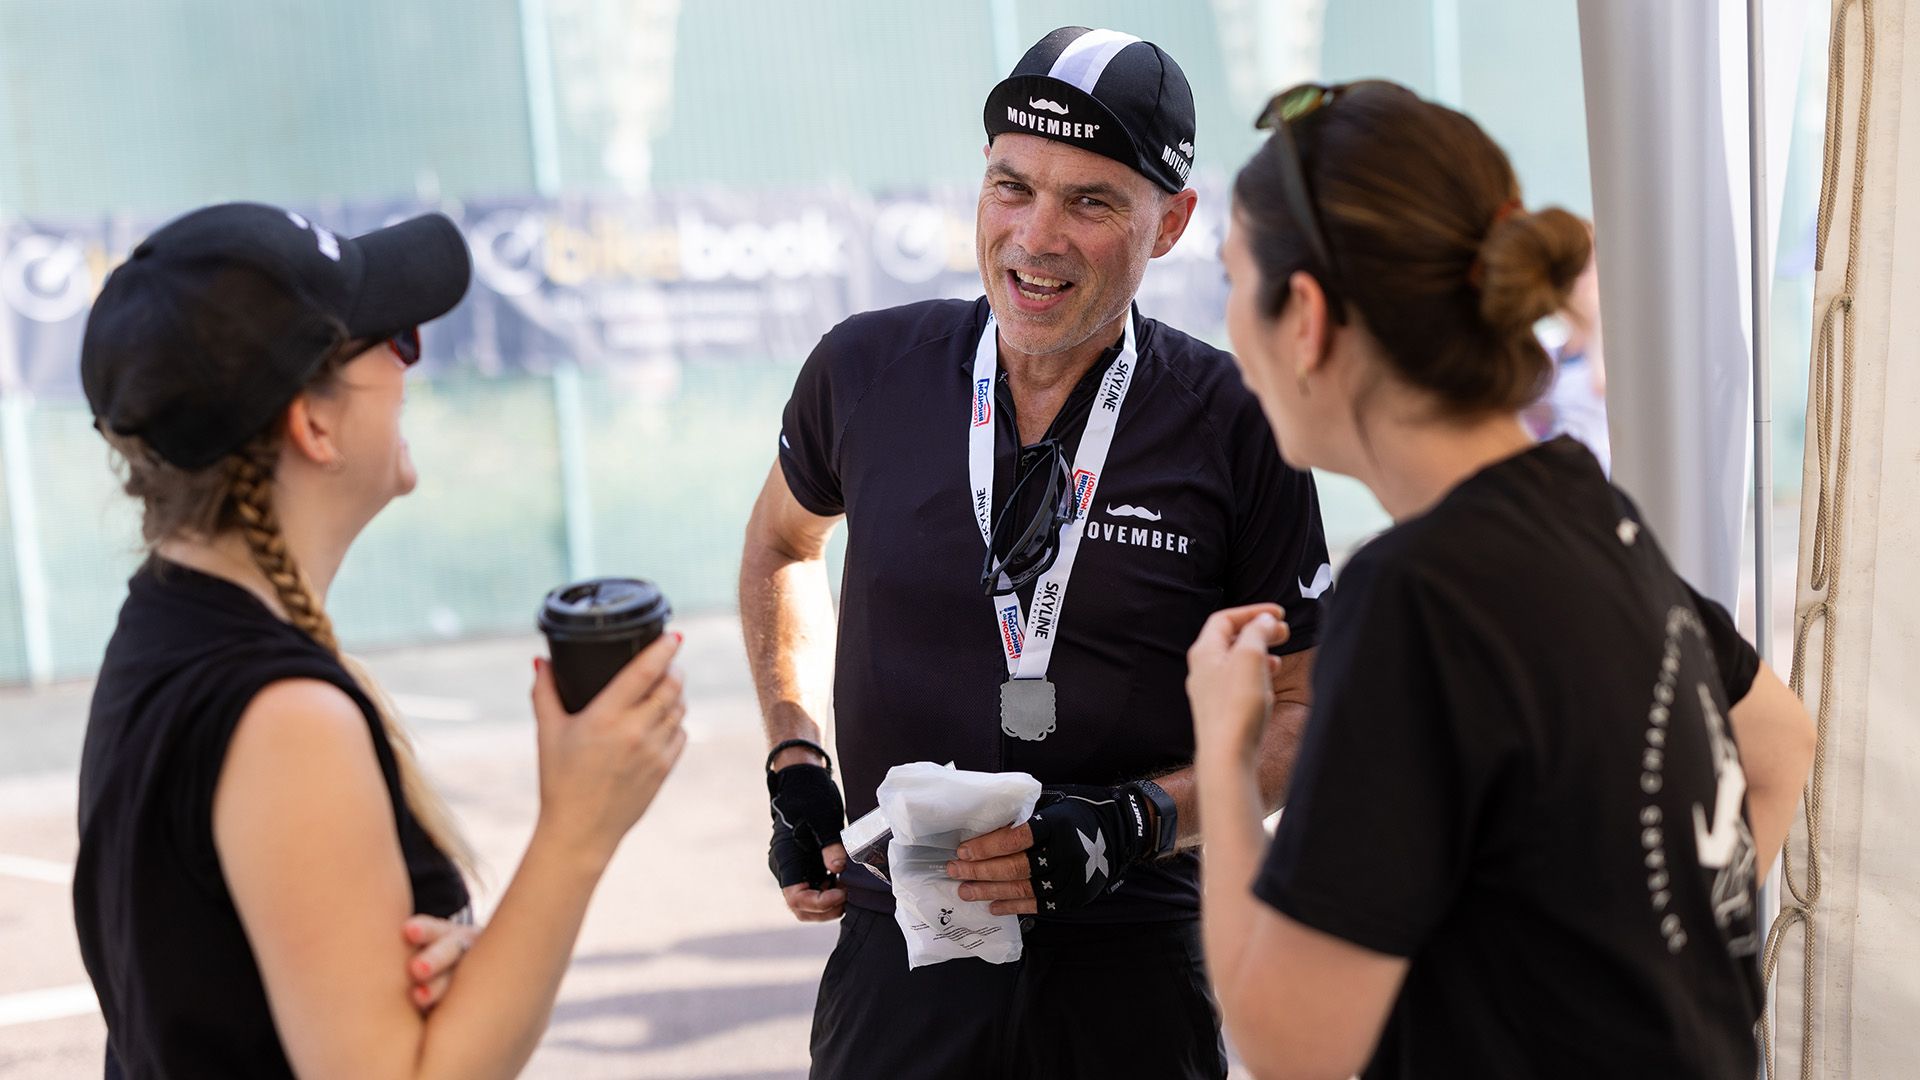 Photo of smiling cyclist after a race chatting to two people wearing black Movember-branded attire.